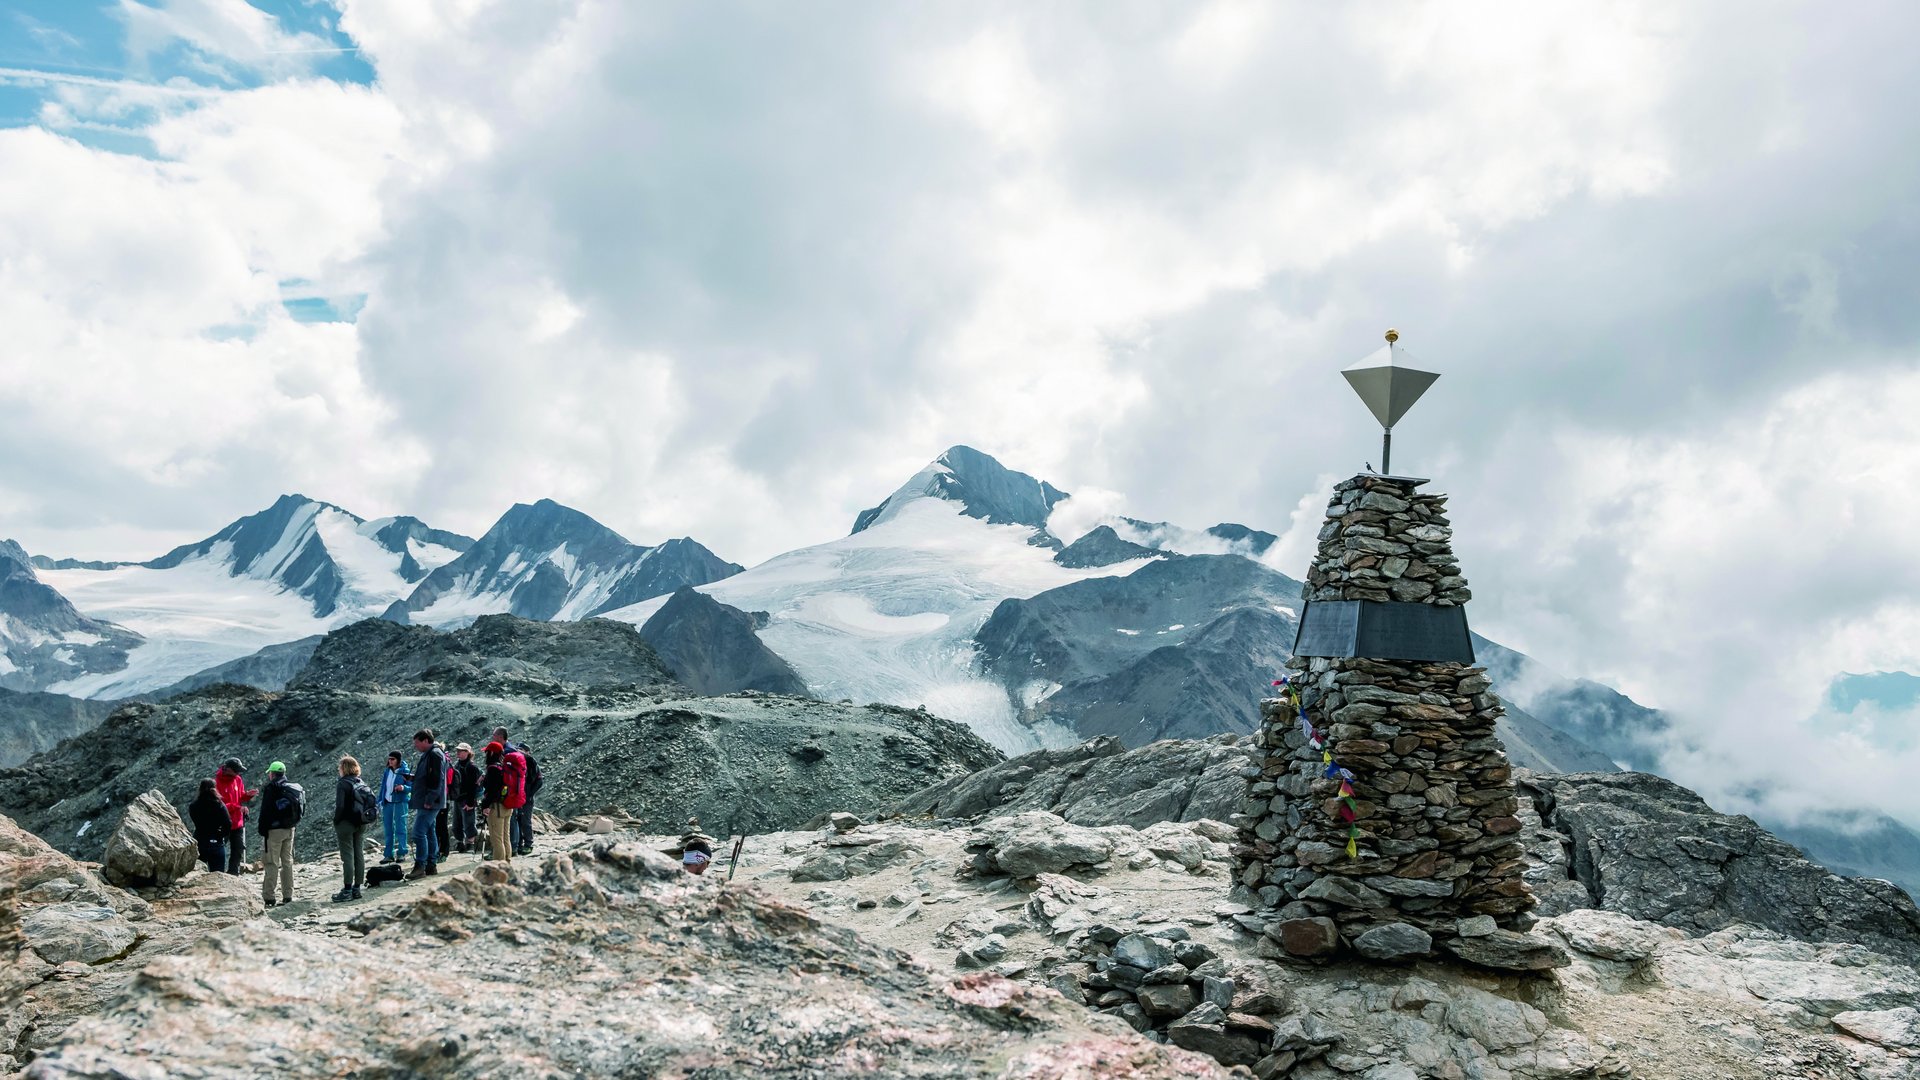 Ötzi’s discovery site: hikes in Ötztal